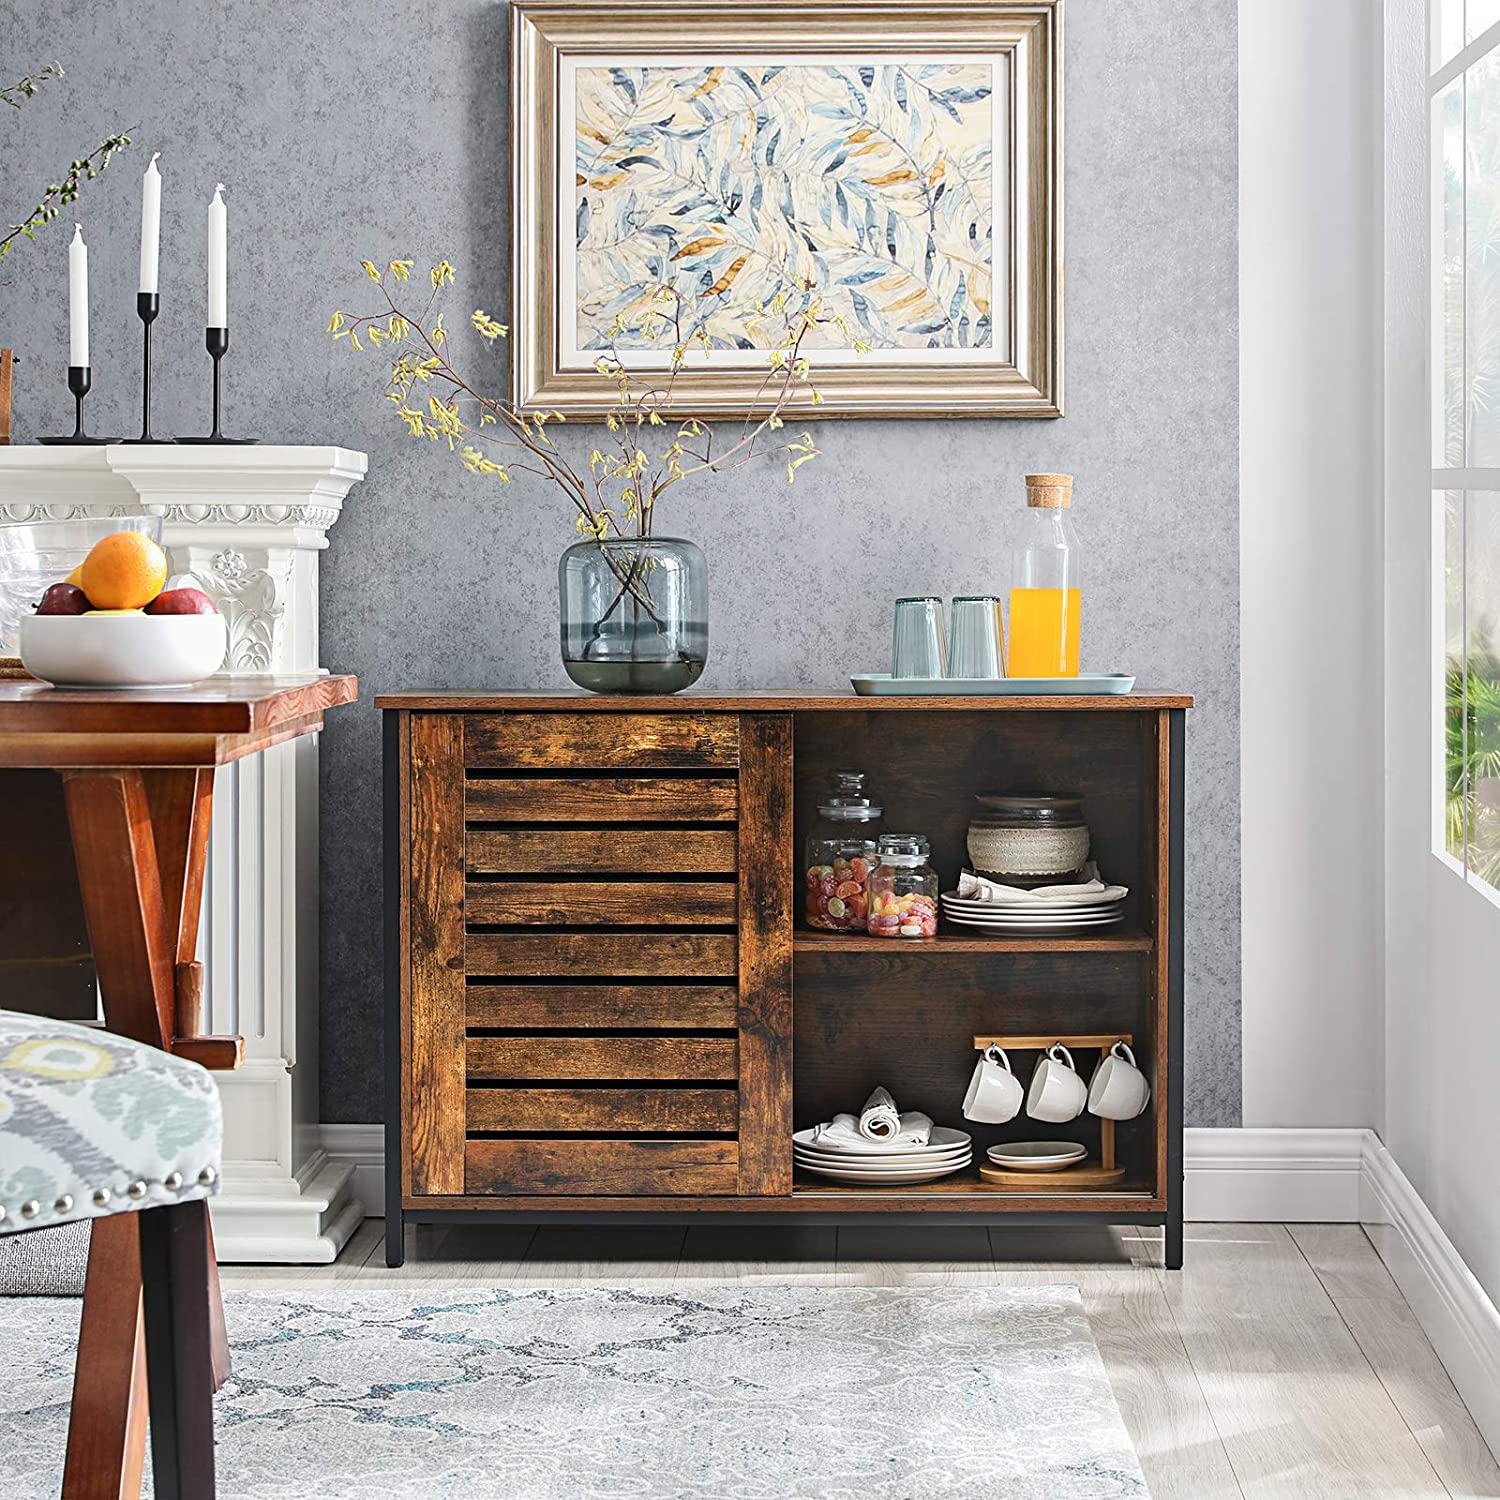 Nancy's Bristol Storage Cabinet - Chest of Drawers - Industrial Cabinet - Dresser - Cabinet with 2 Shelves and 2 Doors - 100 x 35 x 70 cm (L x W x H)